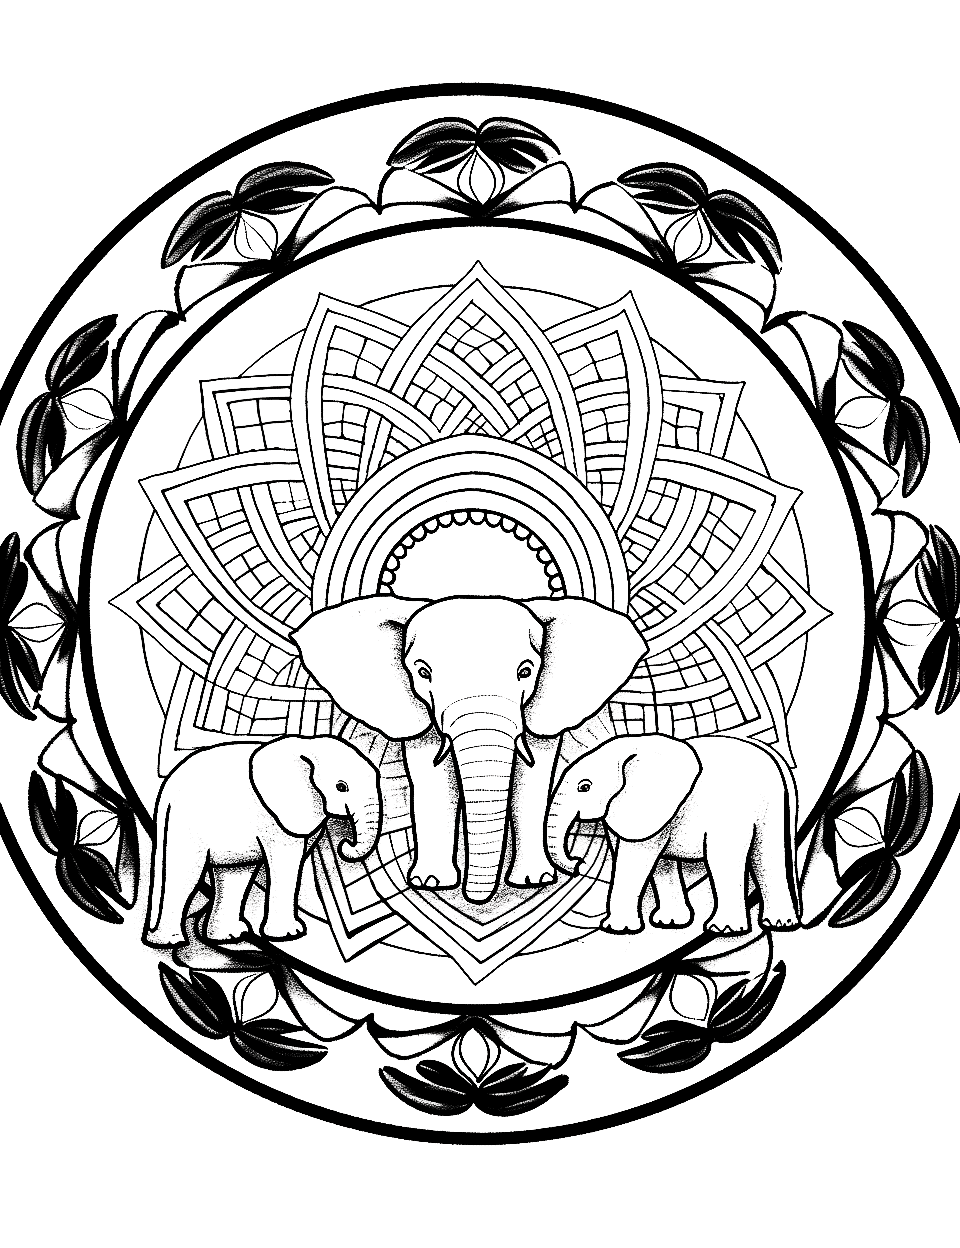 Elephant Parade Mandala Coloring Page - A detailed mandala filled with elephants of various sizes, surrounded by intricate African savannah designs.